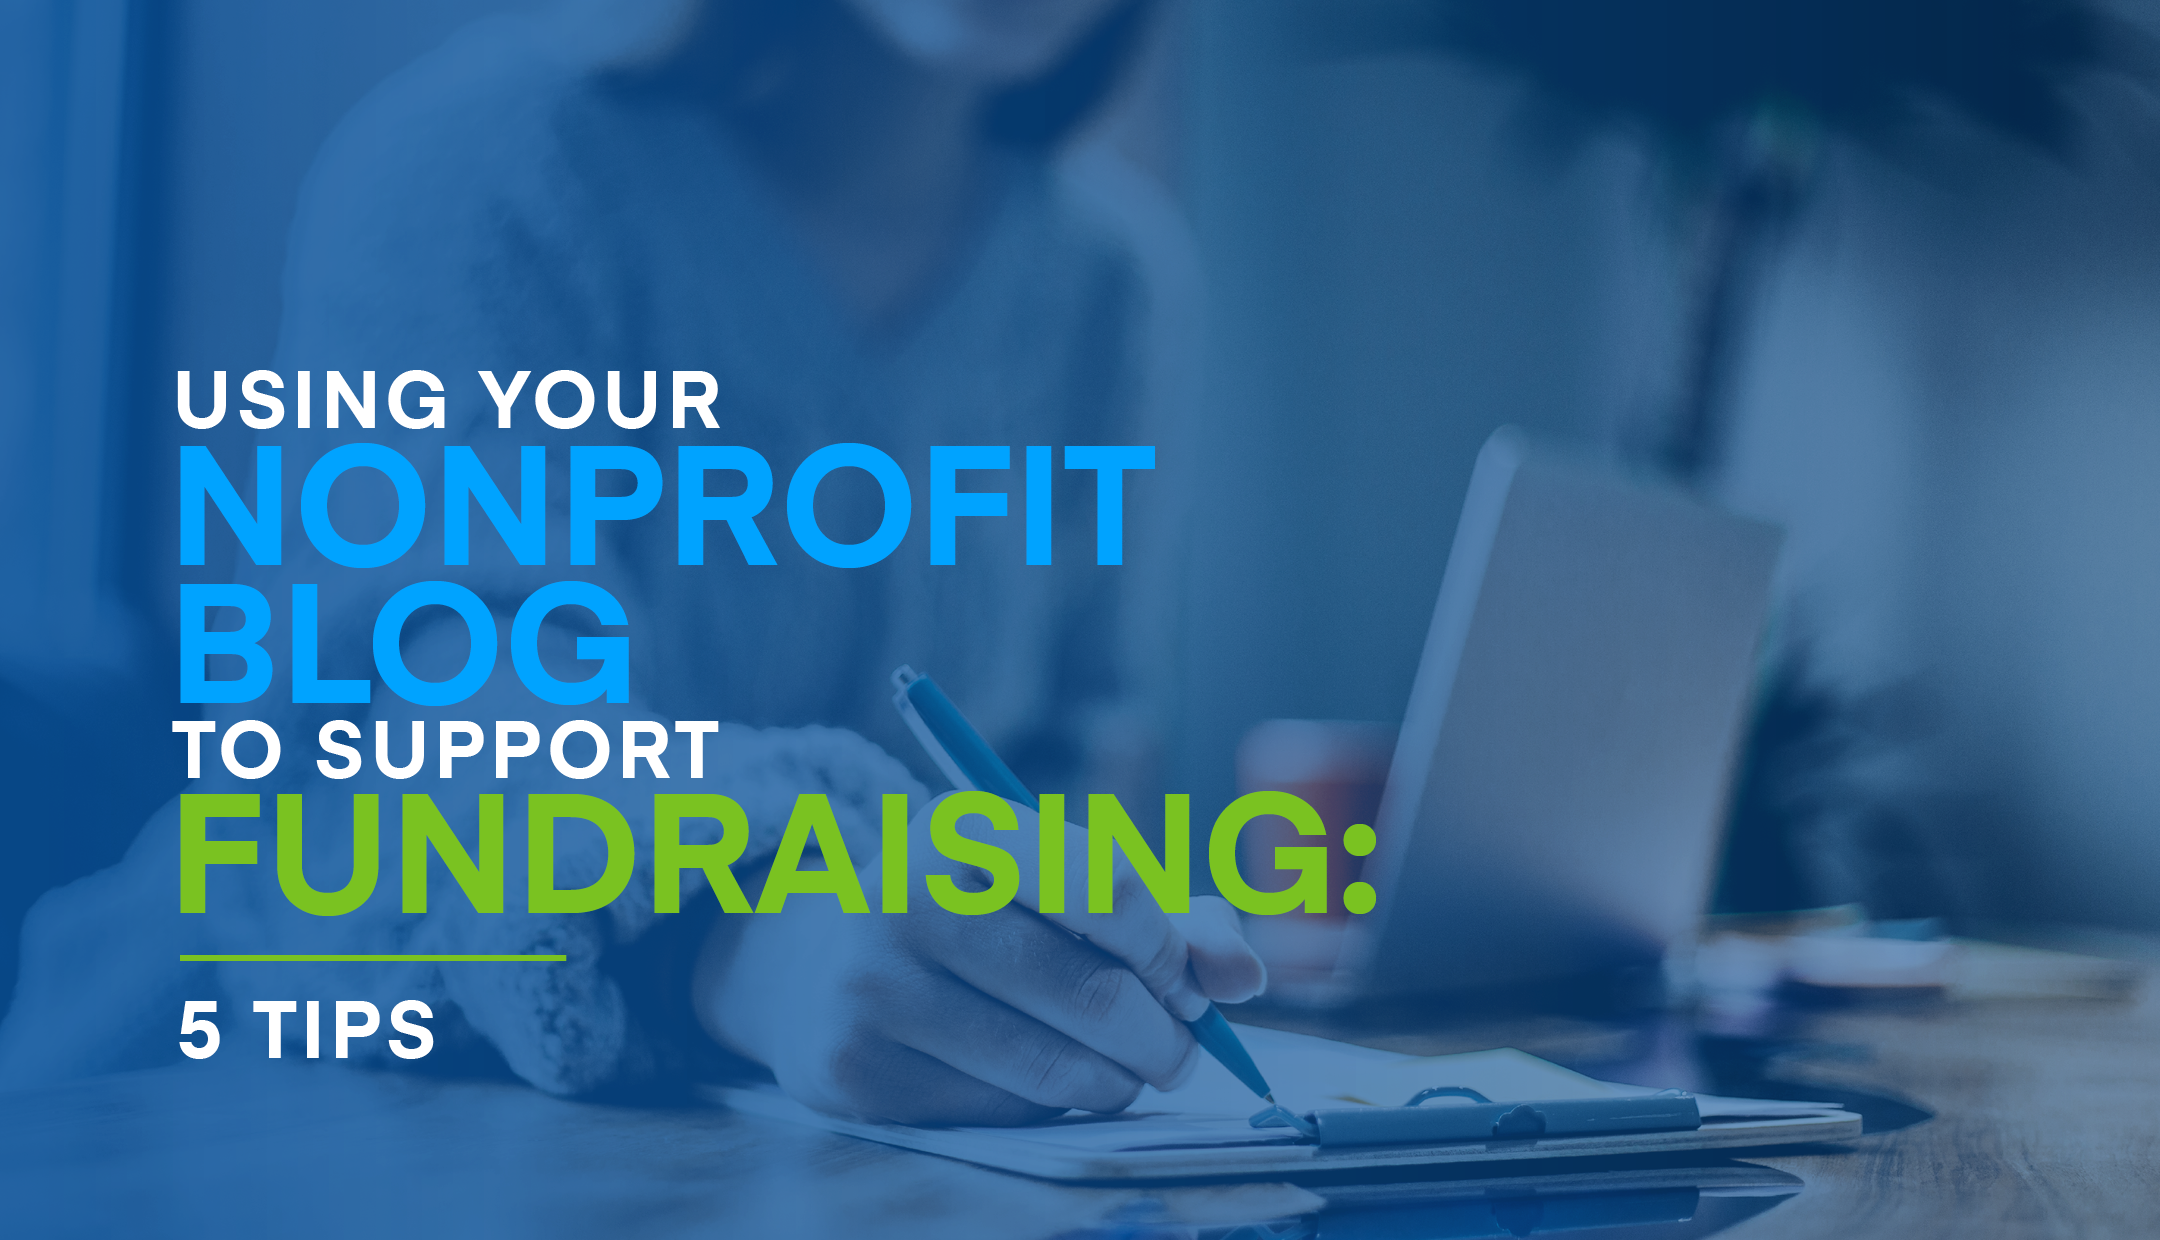 Using Your Nonprofit Blog to Support Fundraising: 5 Tips